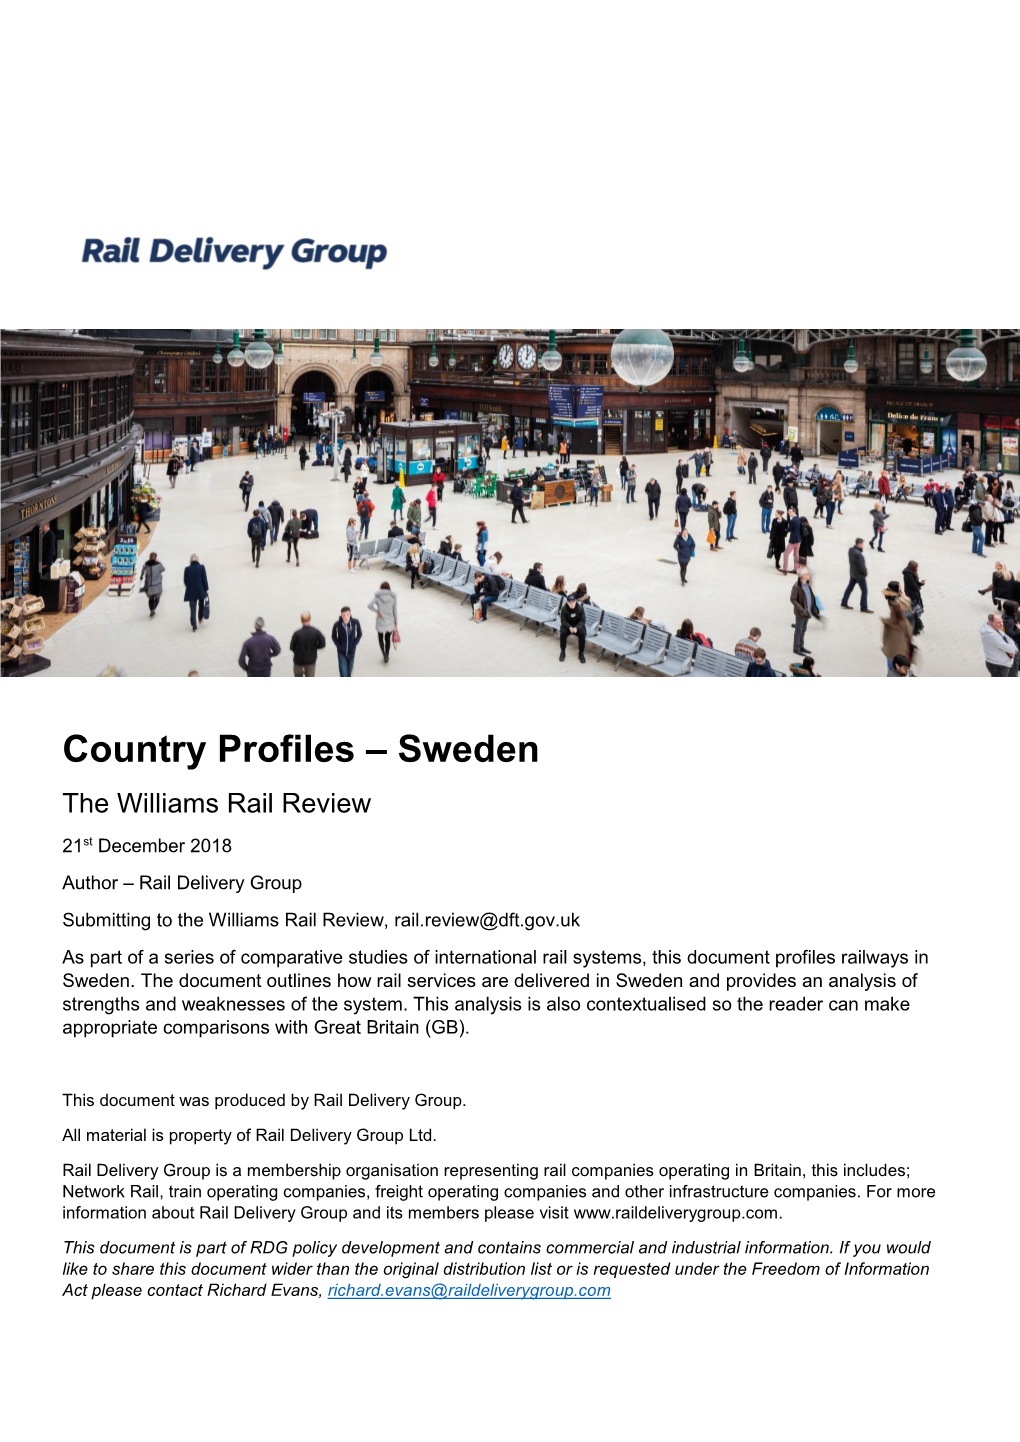 Country Profiles – Sweden